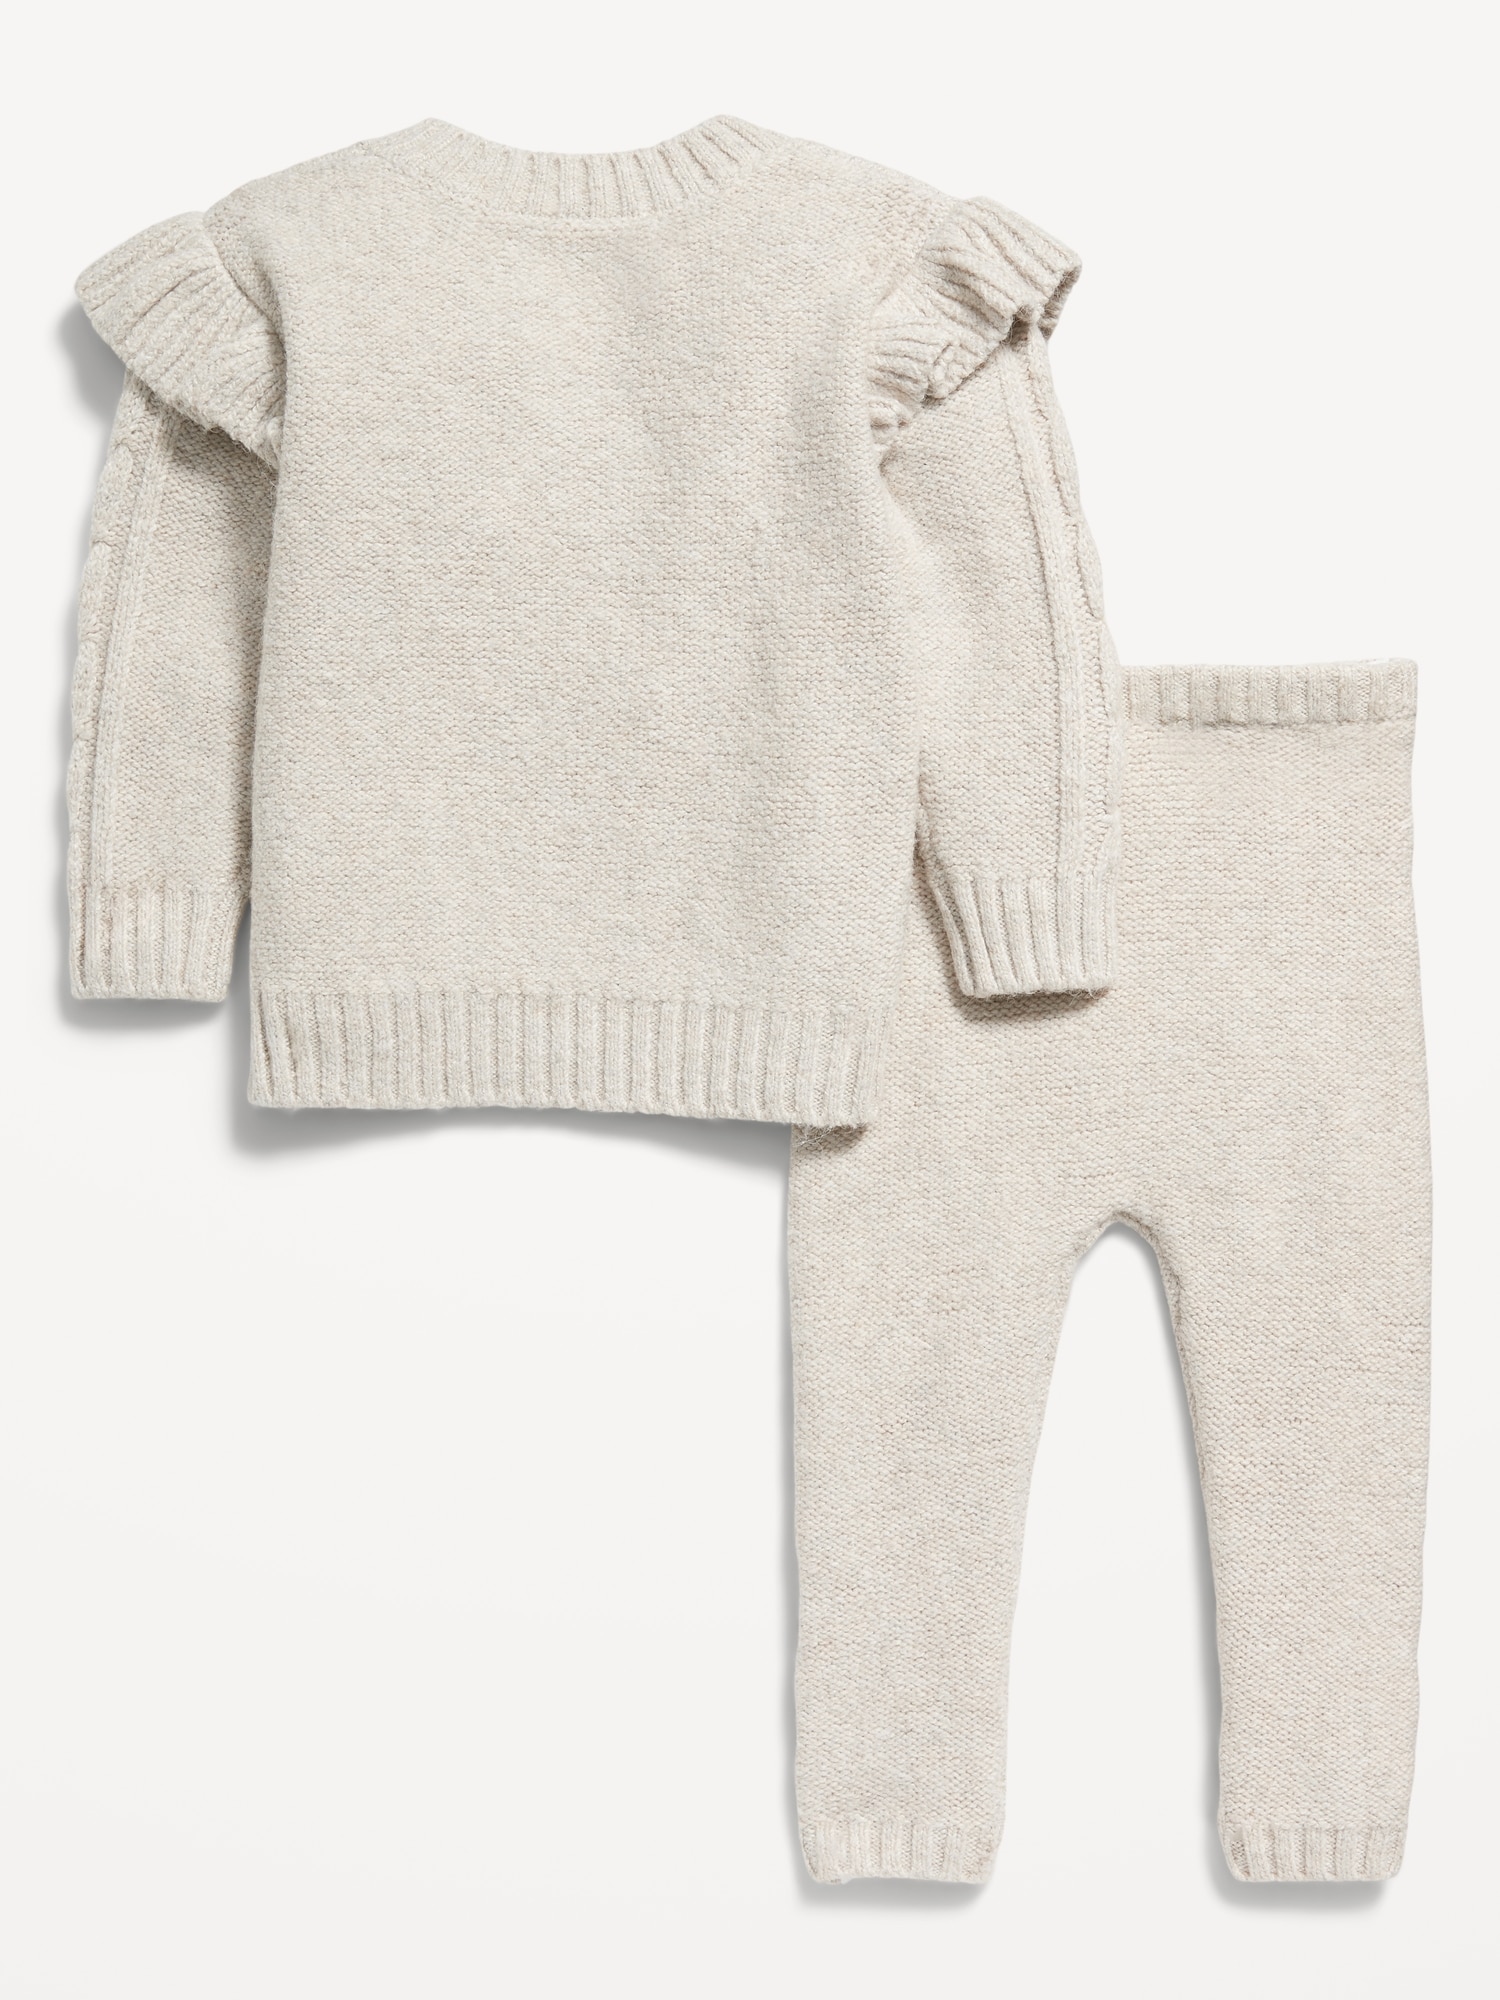 Knit sweater with ruffle trim and leggings co-ord - PROMOTION - Newborn -  Kids 